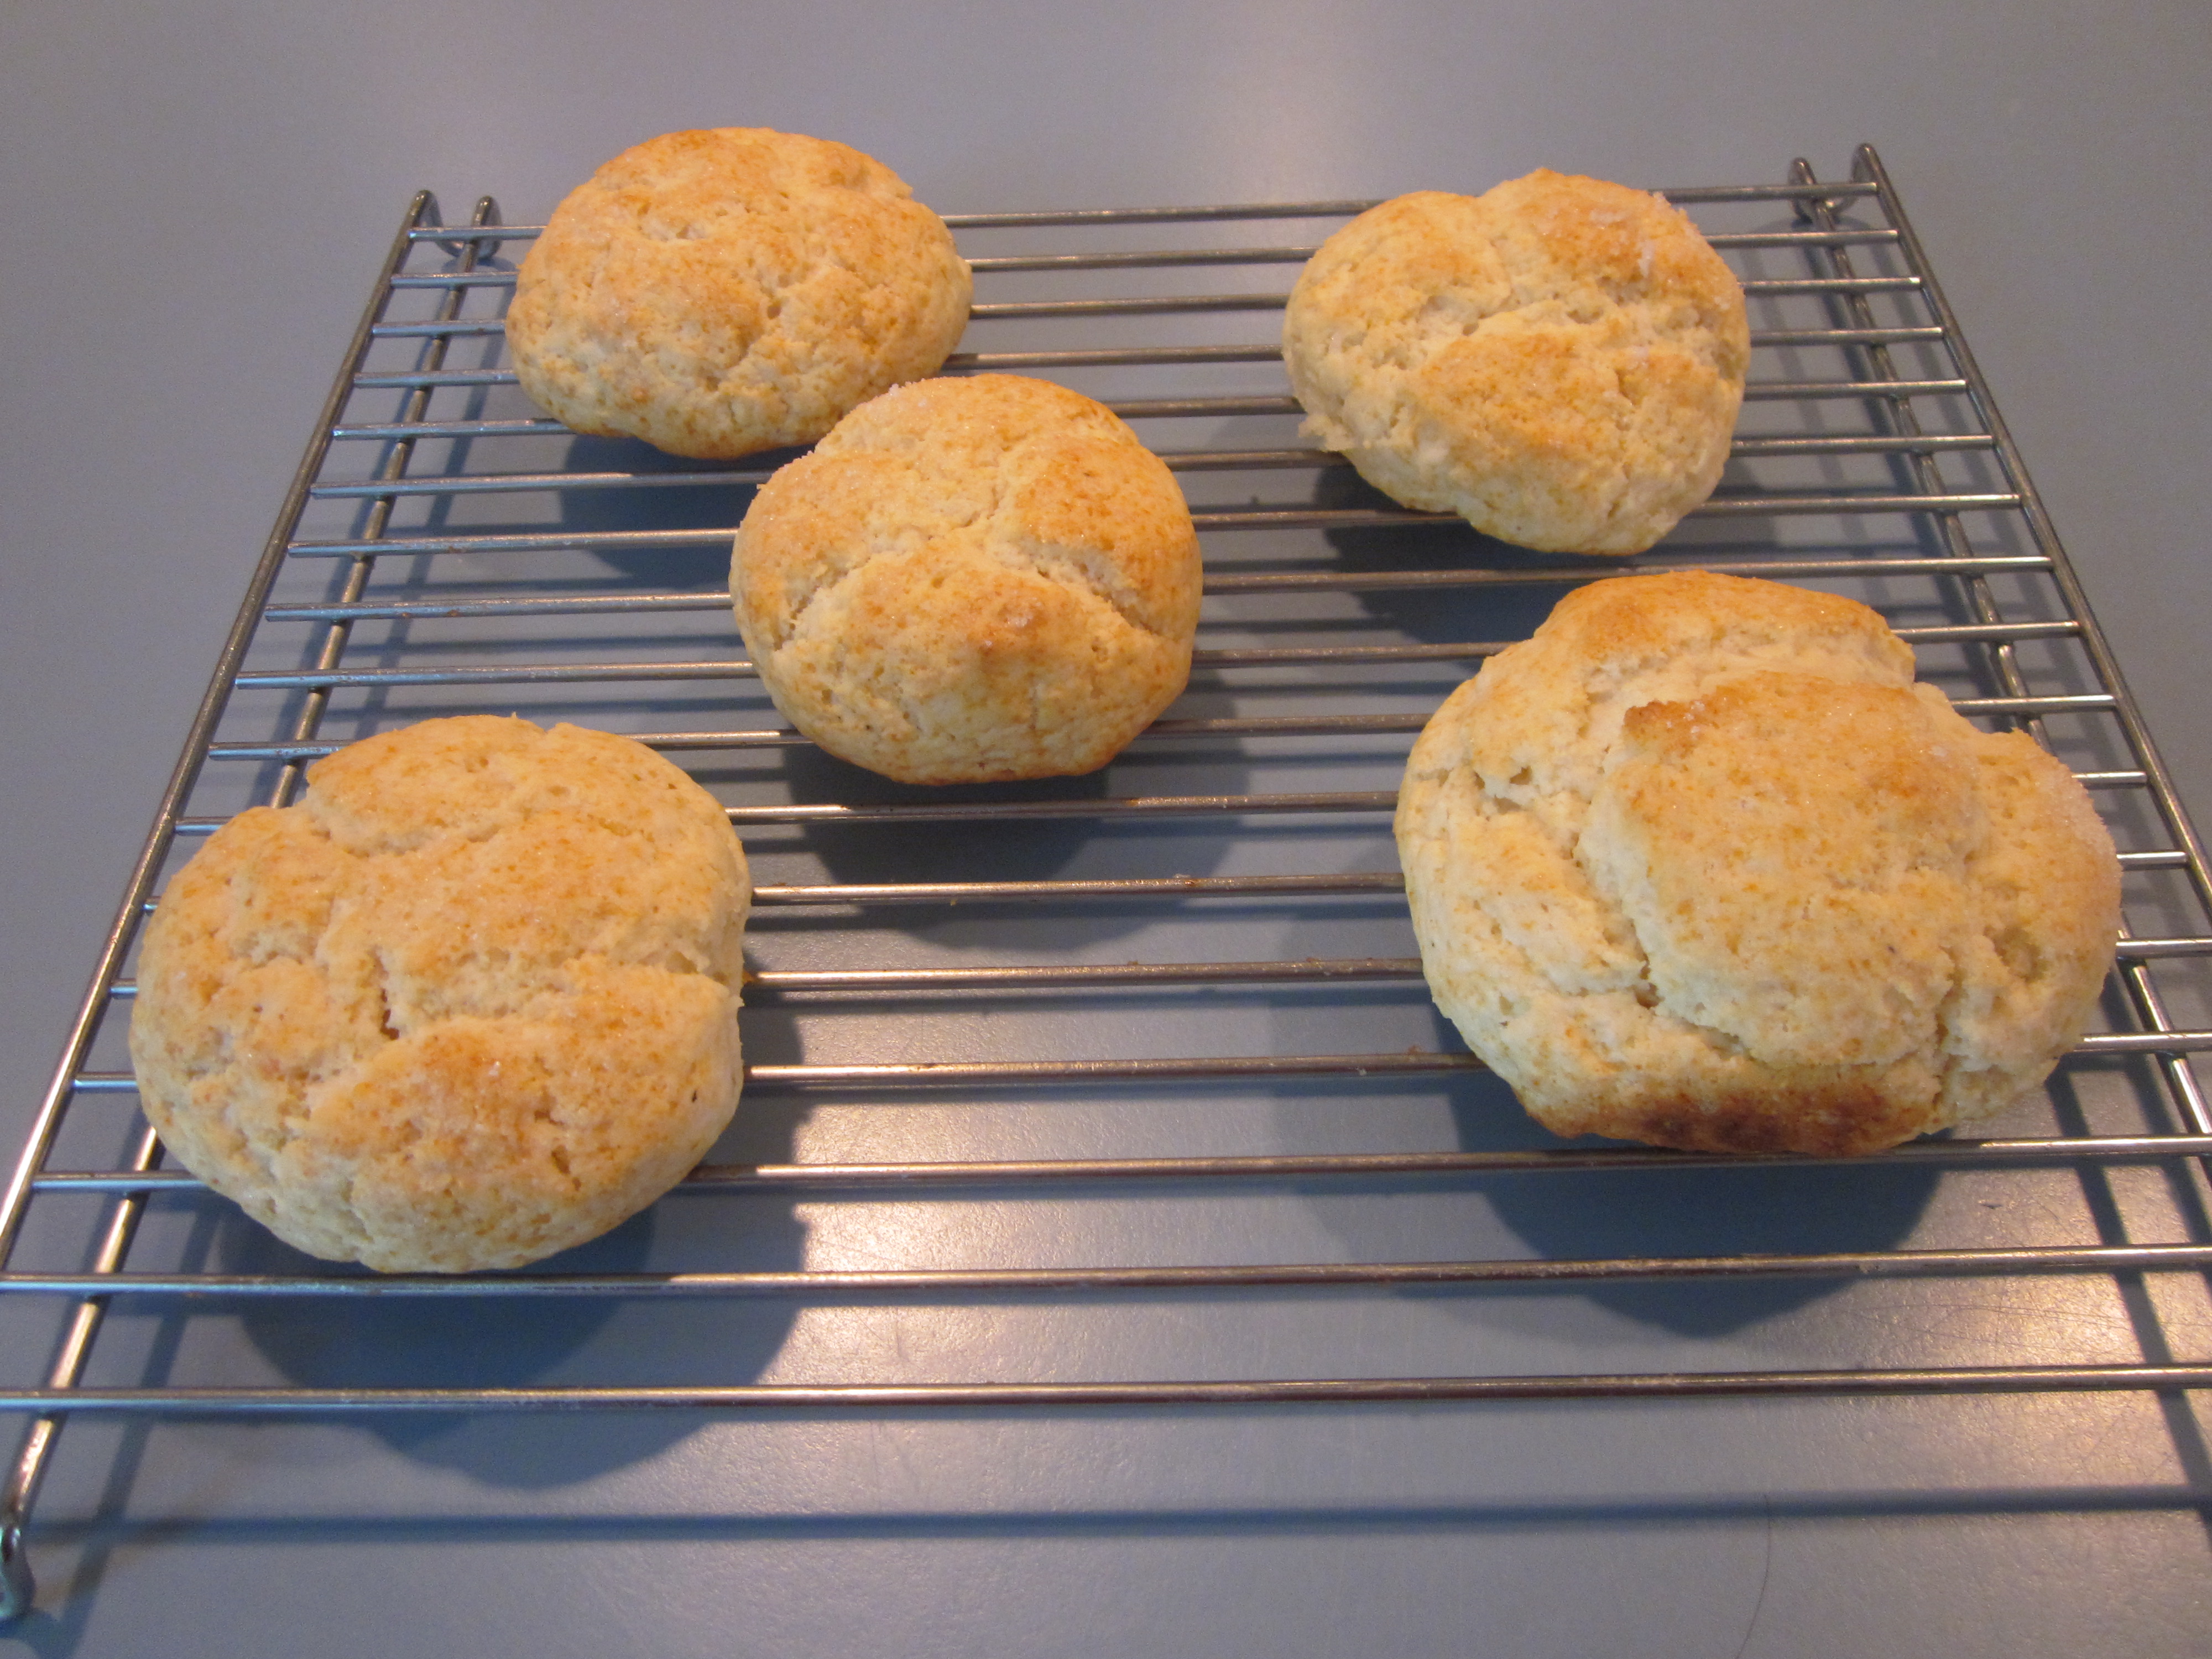 Scones hot from the oven